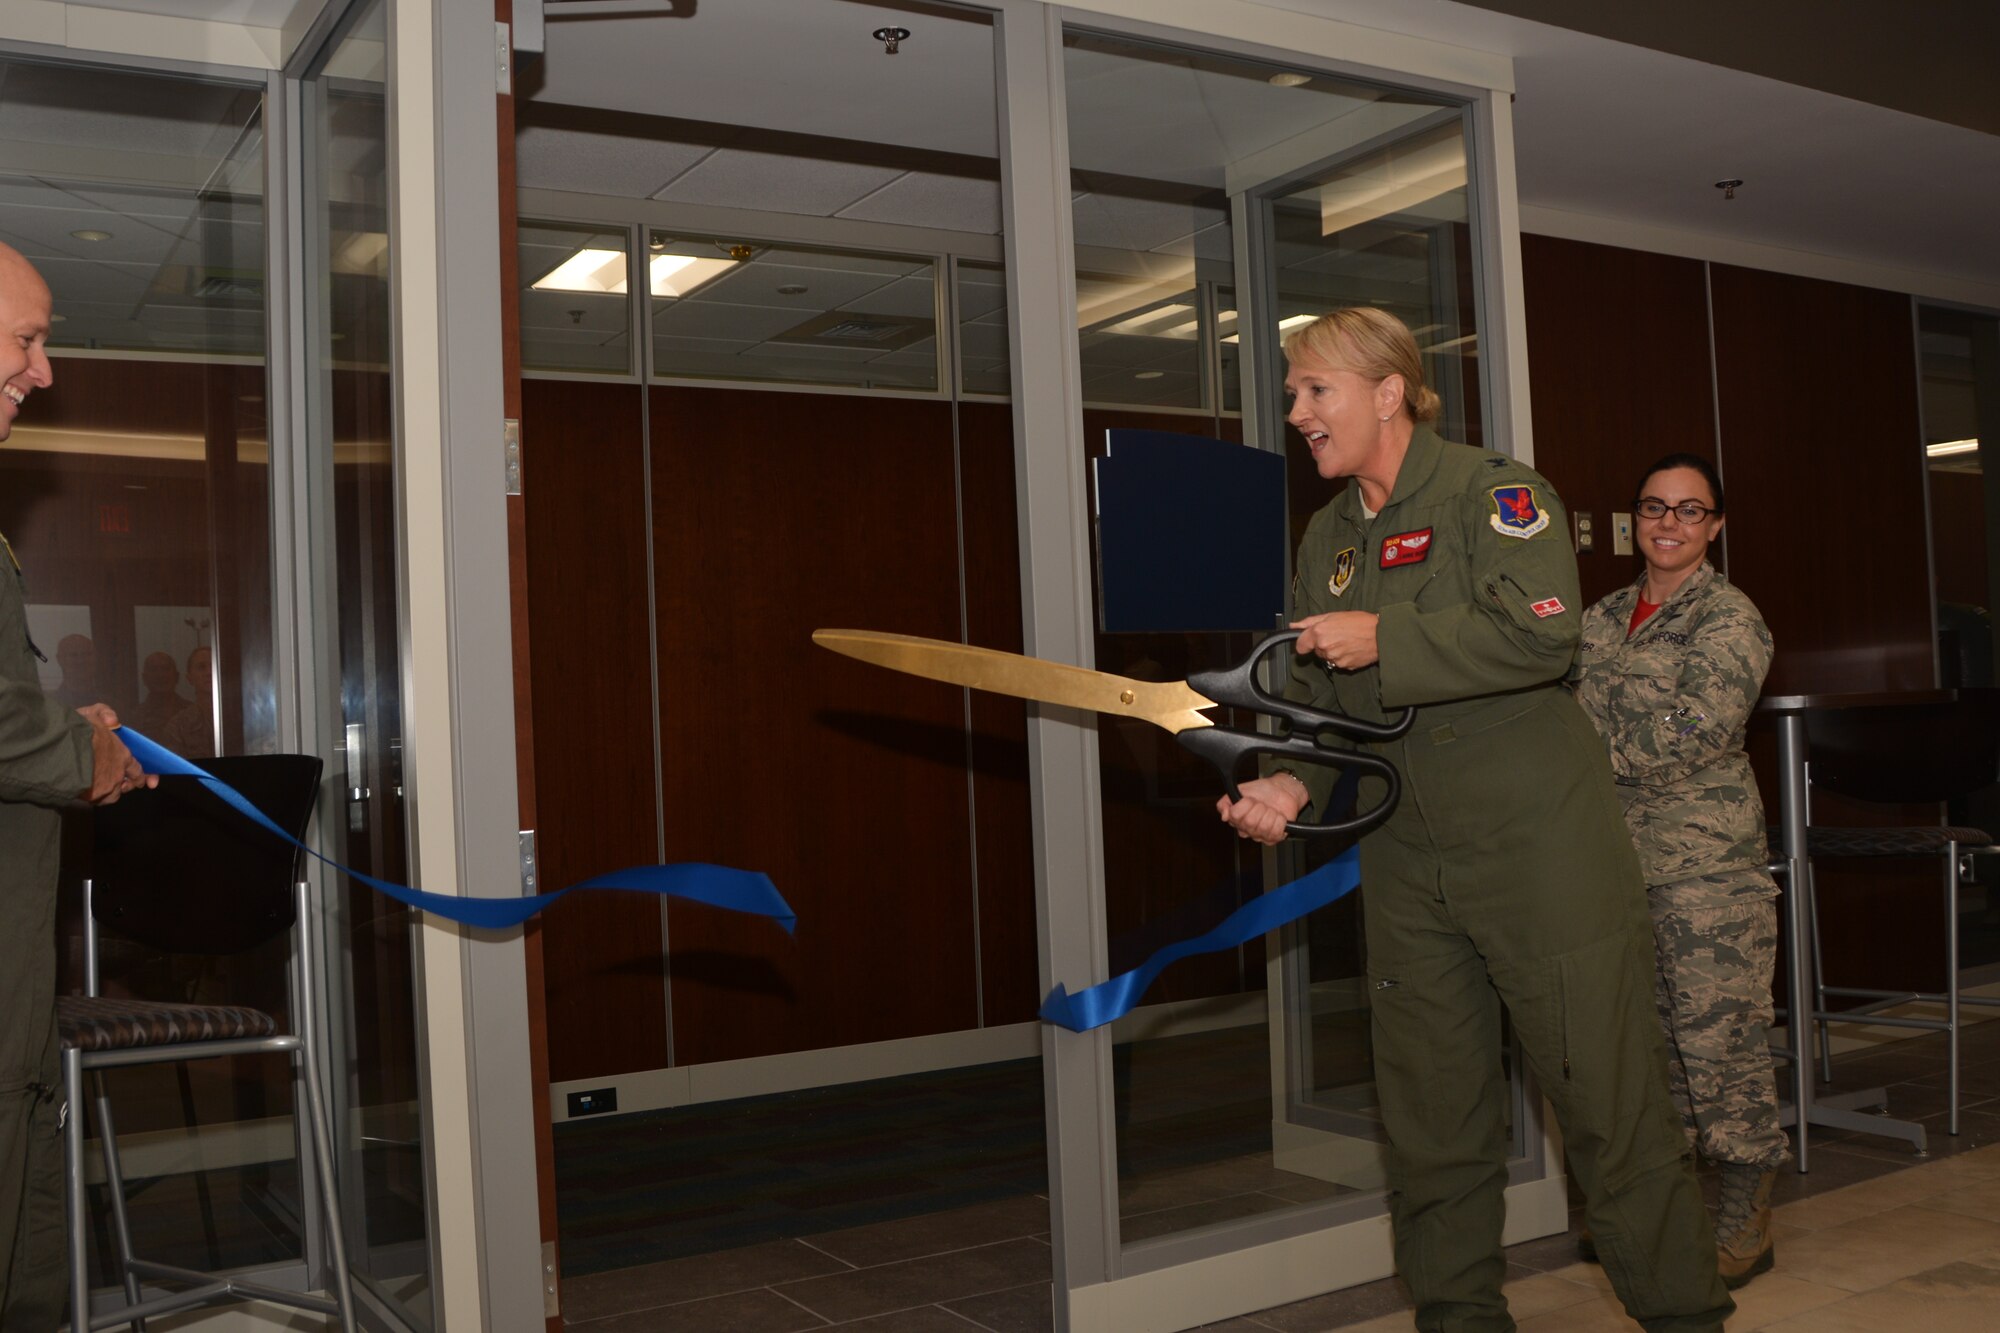 With a quick motion of oversized scissors, Col. Laurie Dickson, Commander, 513th Air Control Group, officially "opens" the new 513th ACG headquarters for business Sept. 7, 2018, at Tinker Air Force Base, Oklahoma. The 513th Air Control Group is the only Air Force Reserve unit to fly and maintain the E-3 Sentry, an Airborne Warning and Control System aircraft that provides surveillance, warning and tactical control of U.S. and allied military aircraft.  As a Reserve associate unit, Airmen assigned to the 513th ACG work hand-in-hand with the active-duty 552nd Air Control Wing, which is responsible for the E-3 Sentry aircraft assigned to Tinker AFB. Working together, Tinker AFB's Team AWACS maintains a reliable presence in numerous missions worldwide. (Air Force photo by Master Sgt. Grady Epperly)